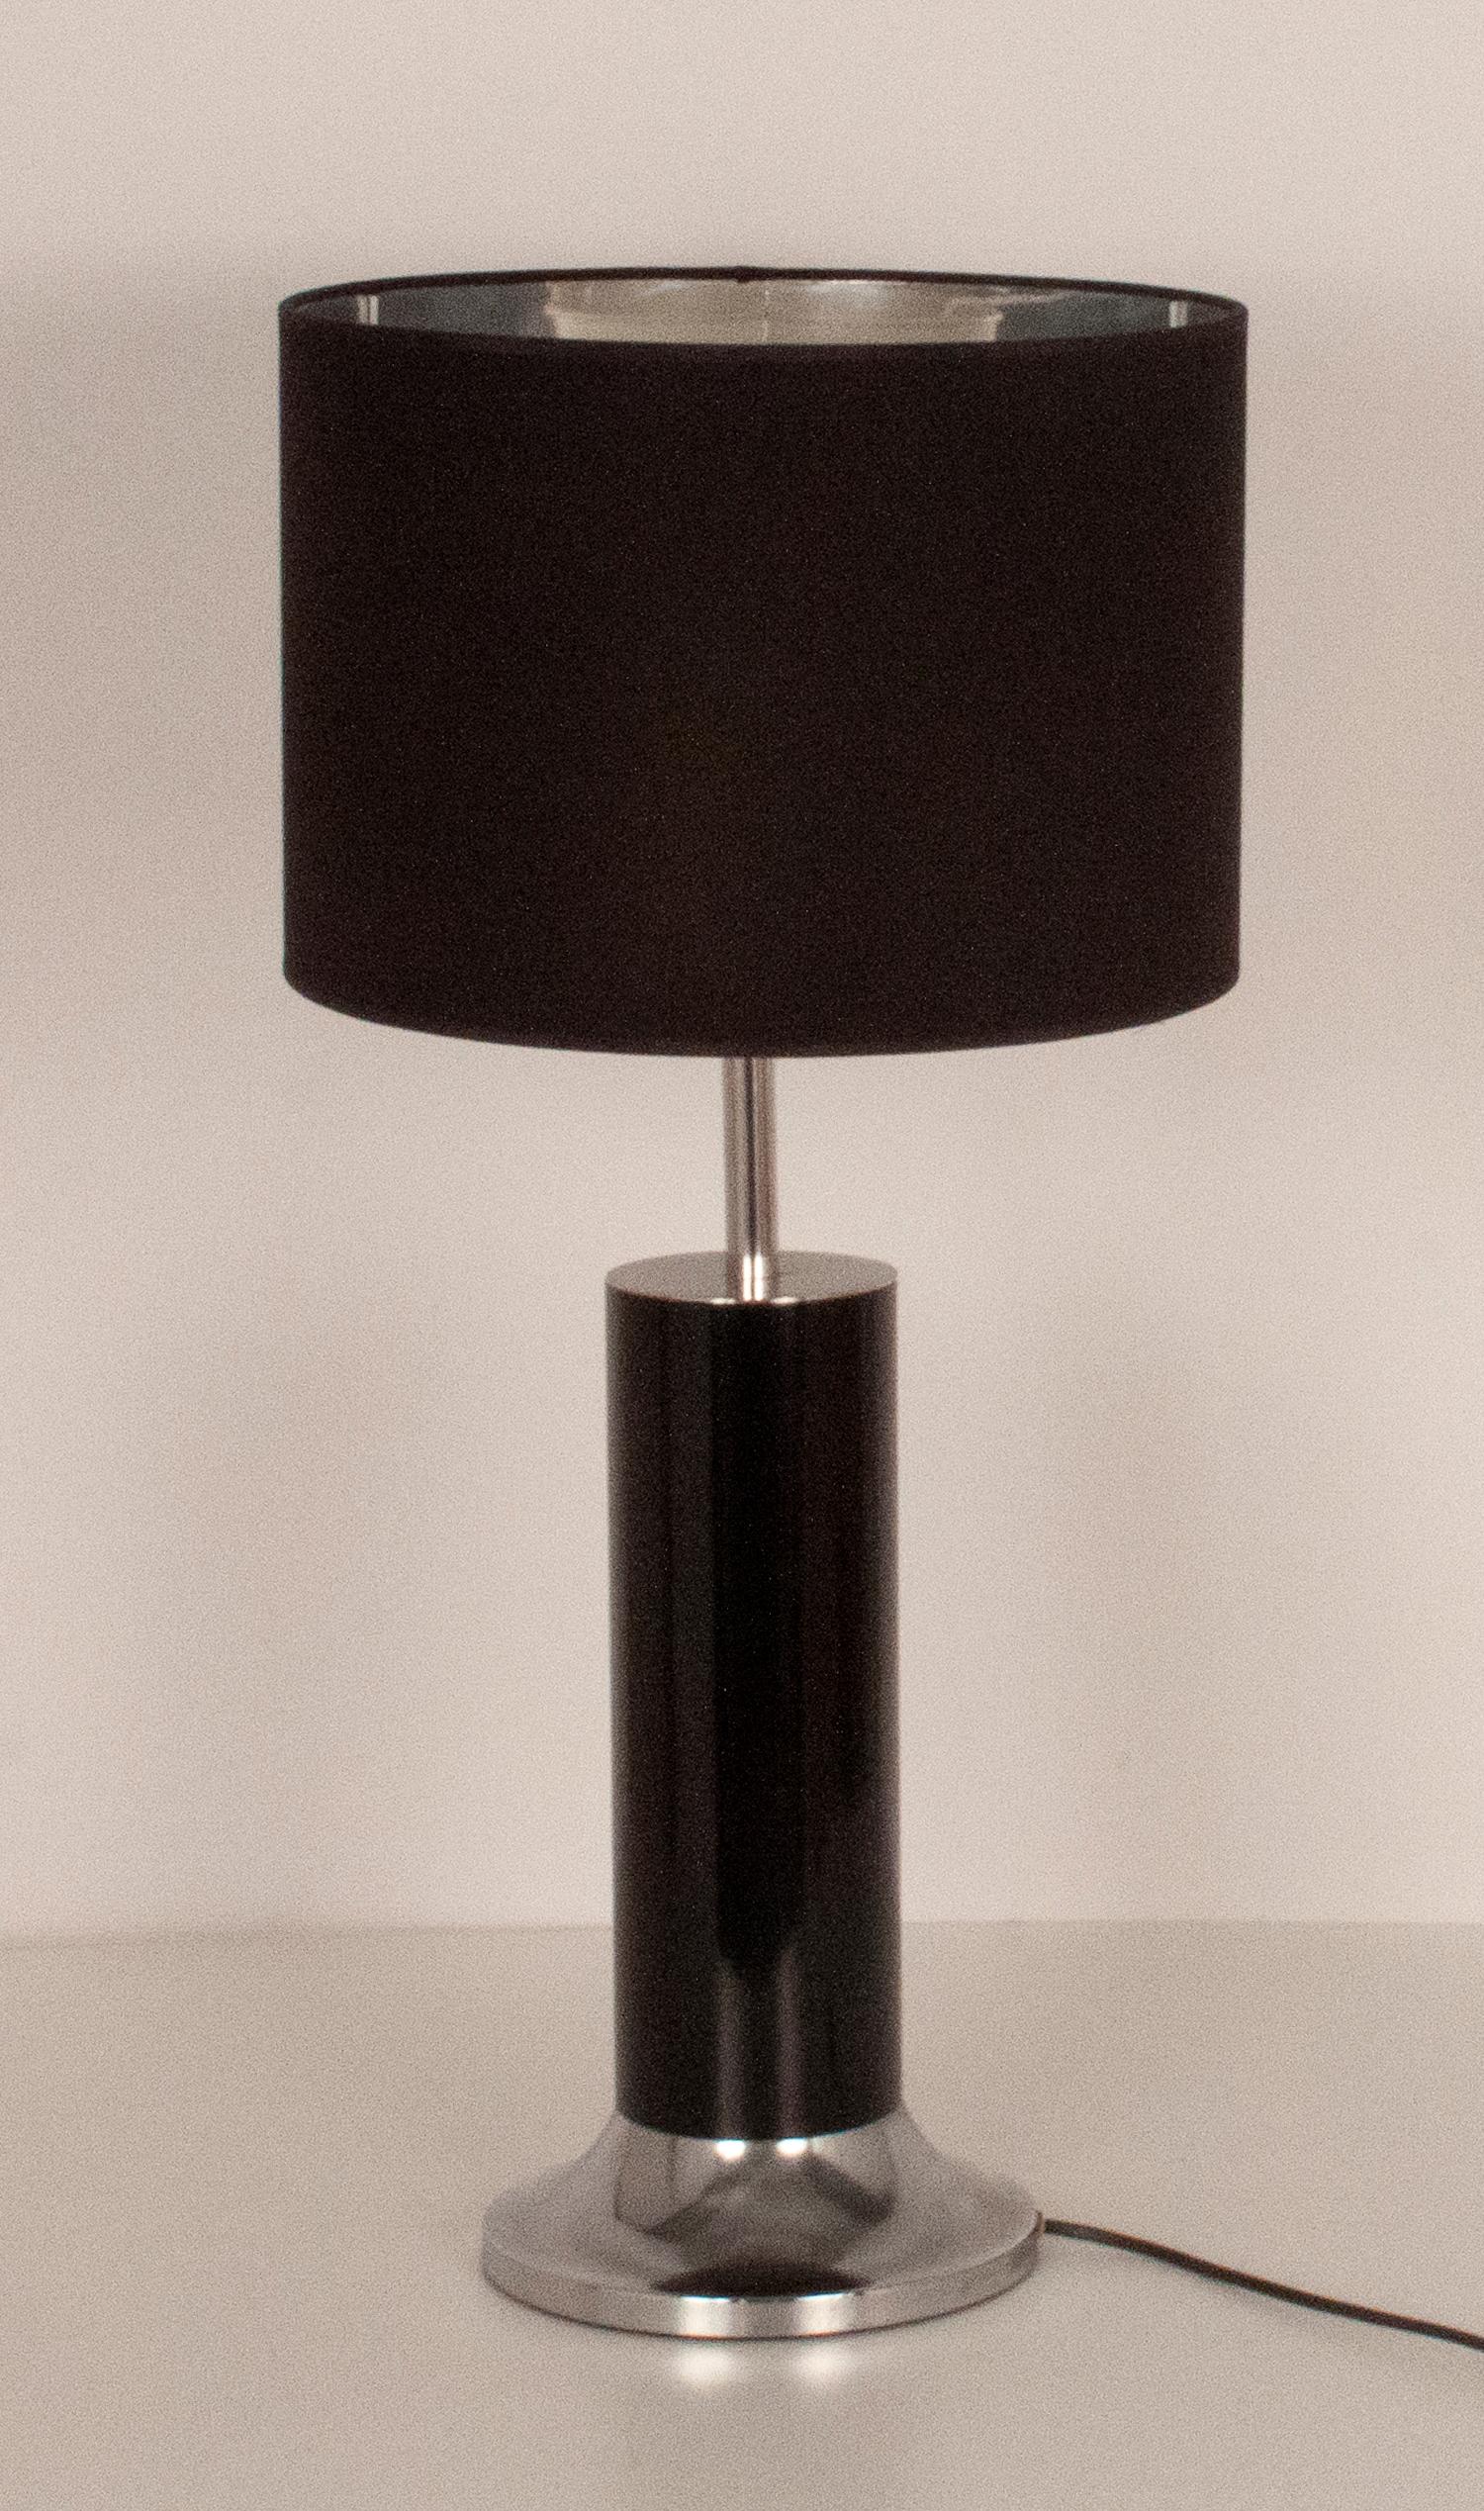 Large Reggiani table lamp chrome and black enameled metal with new fabric, 1970s.
Black new fabric shade and silver color inside. Three bulbs.